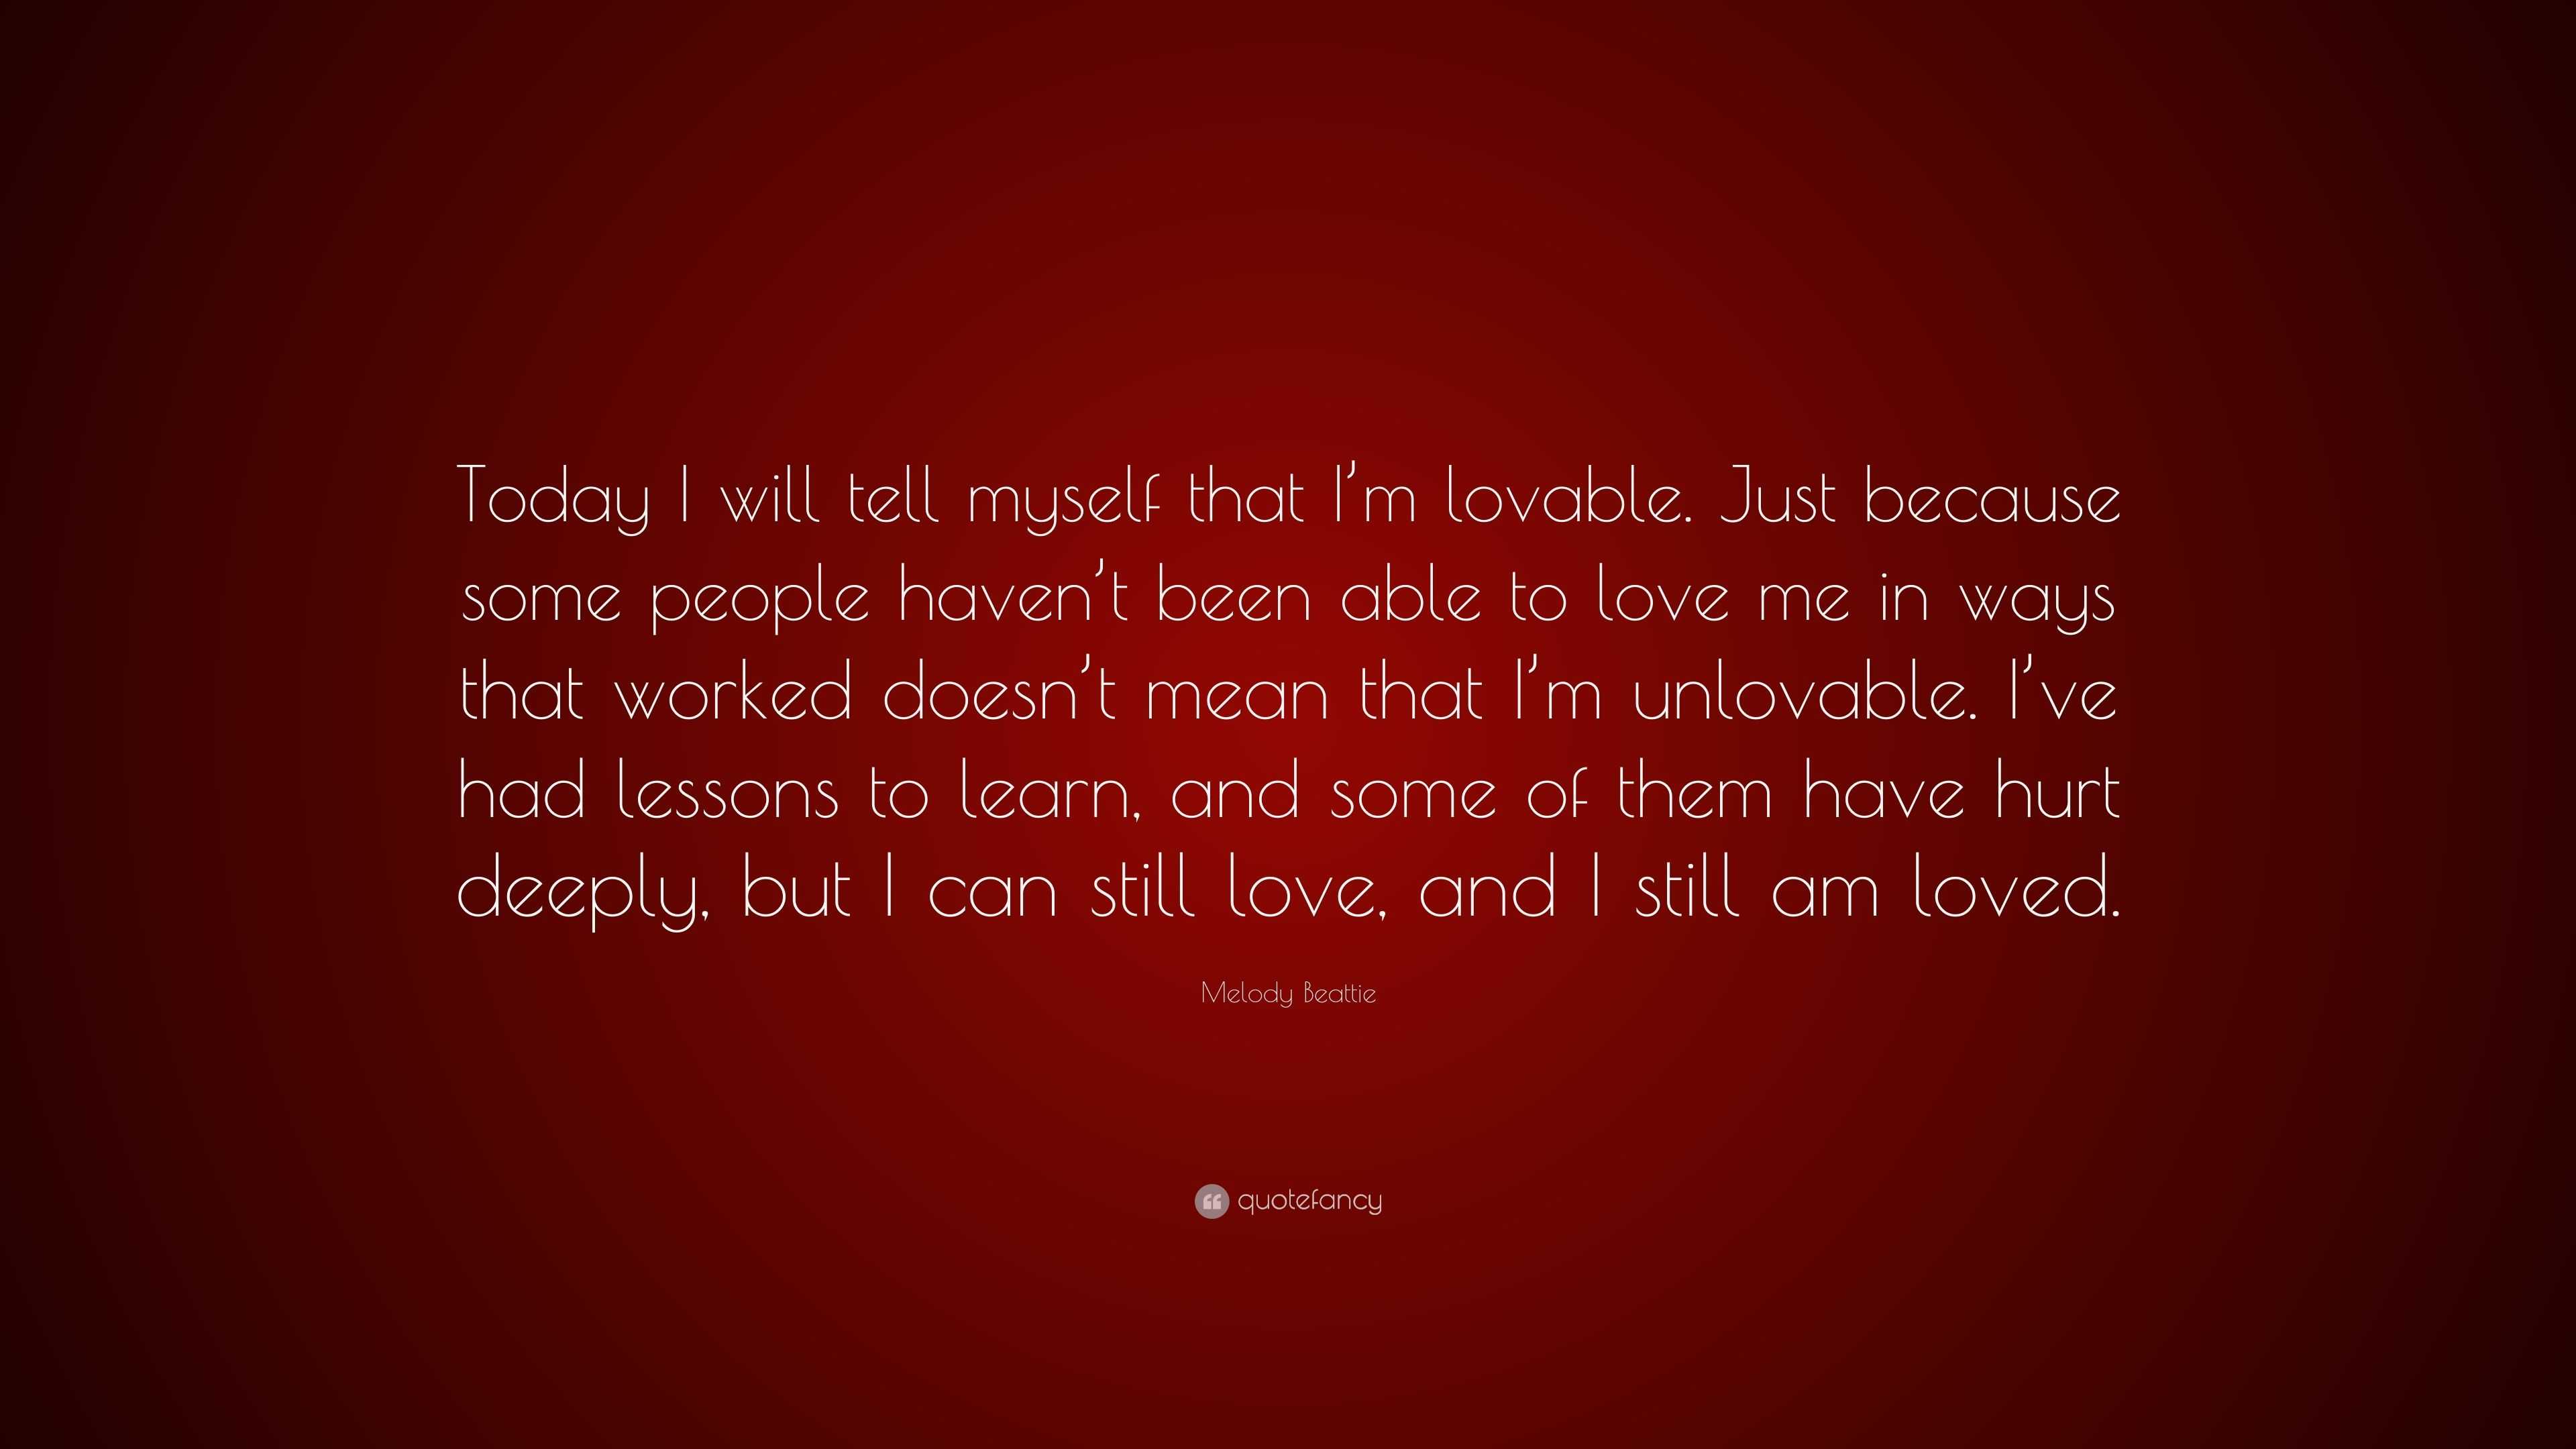 Melody Beattie Quote: “Today I will tell myself that I’m lovable. Just ...